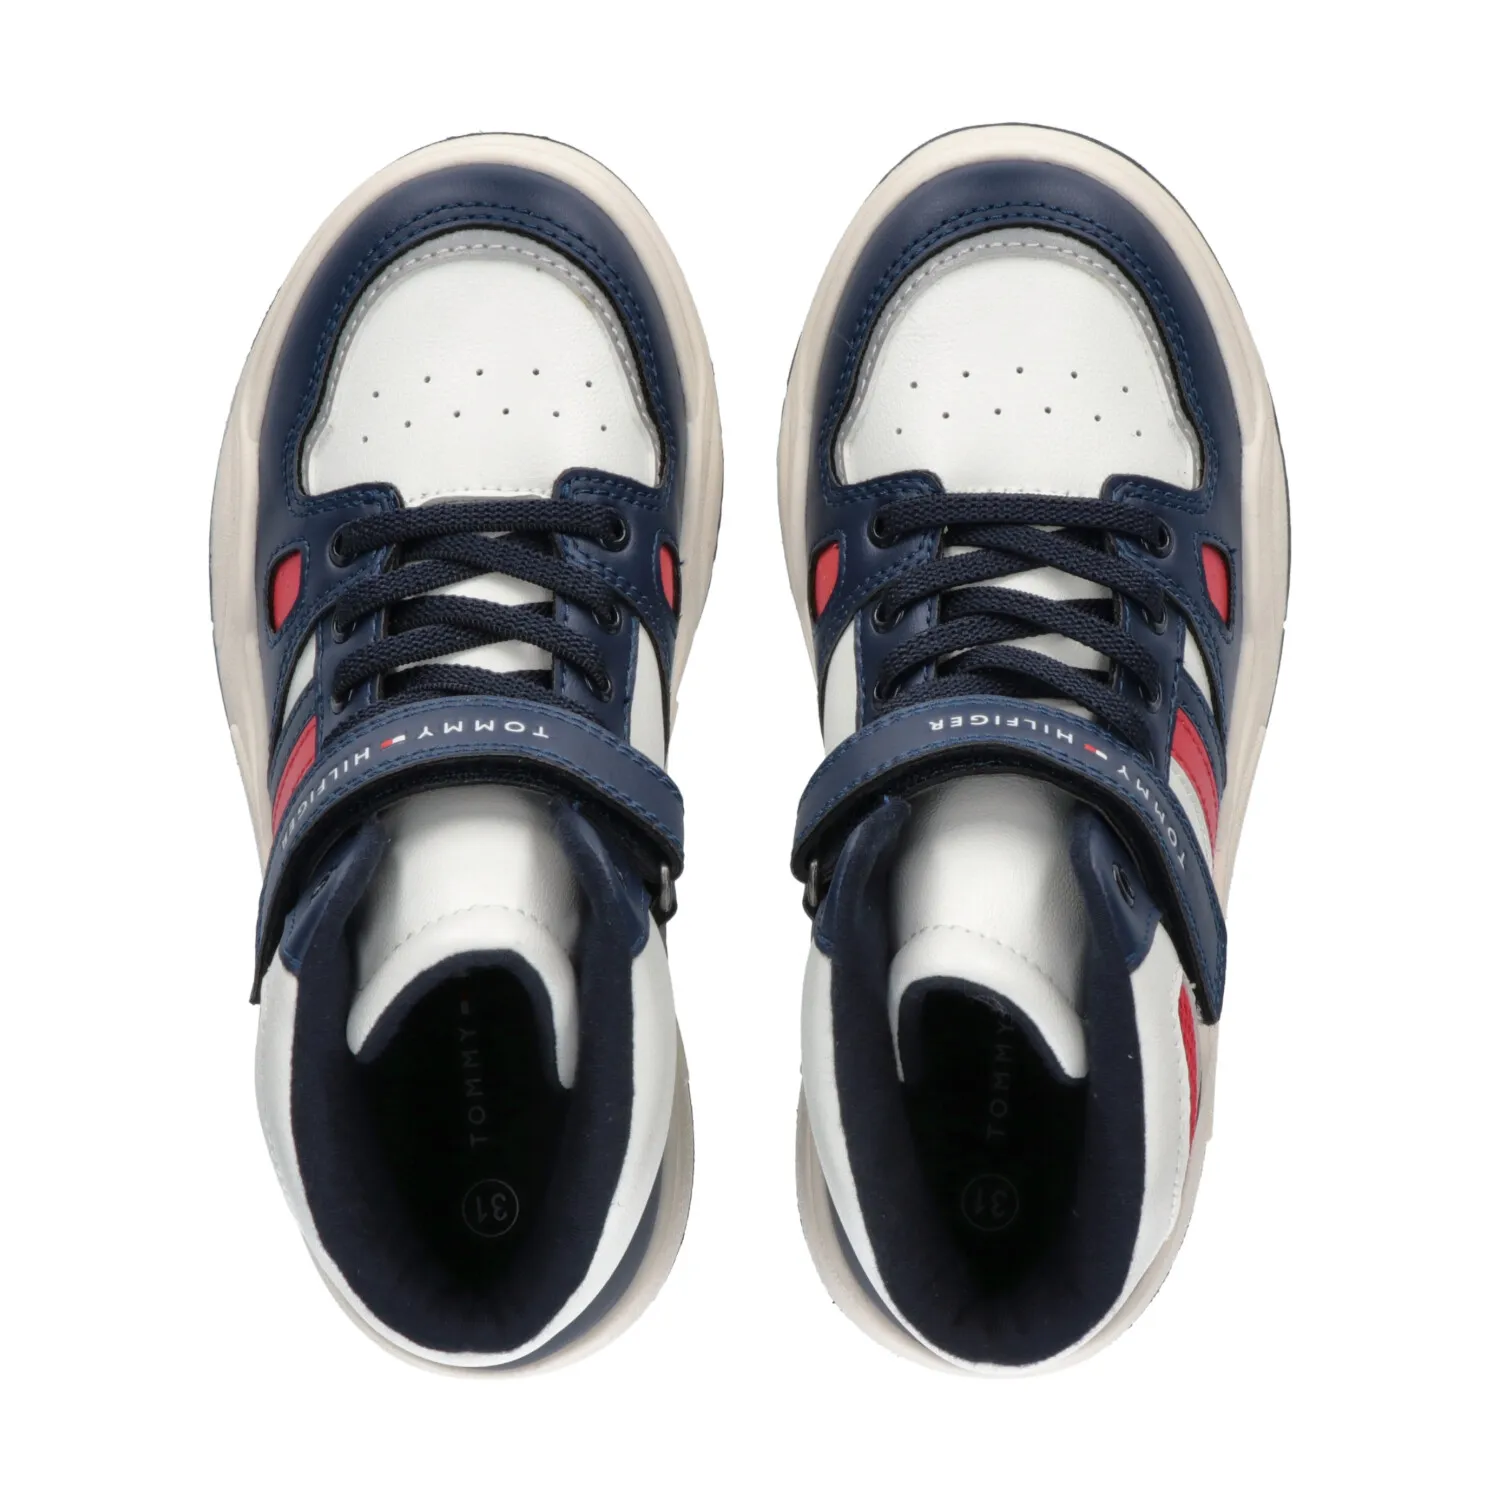 Blue/Off | - Lace High HILFIGER White/Red Boys Stripes Sneakers up/Velcro TOMMY Top Choice+Attitude